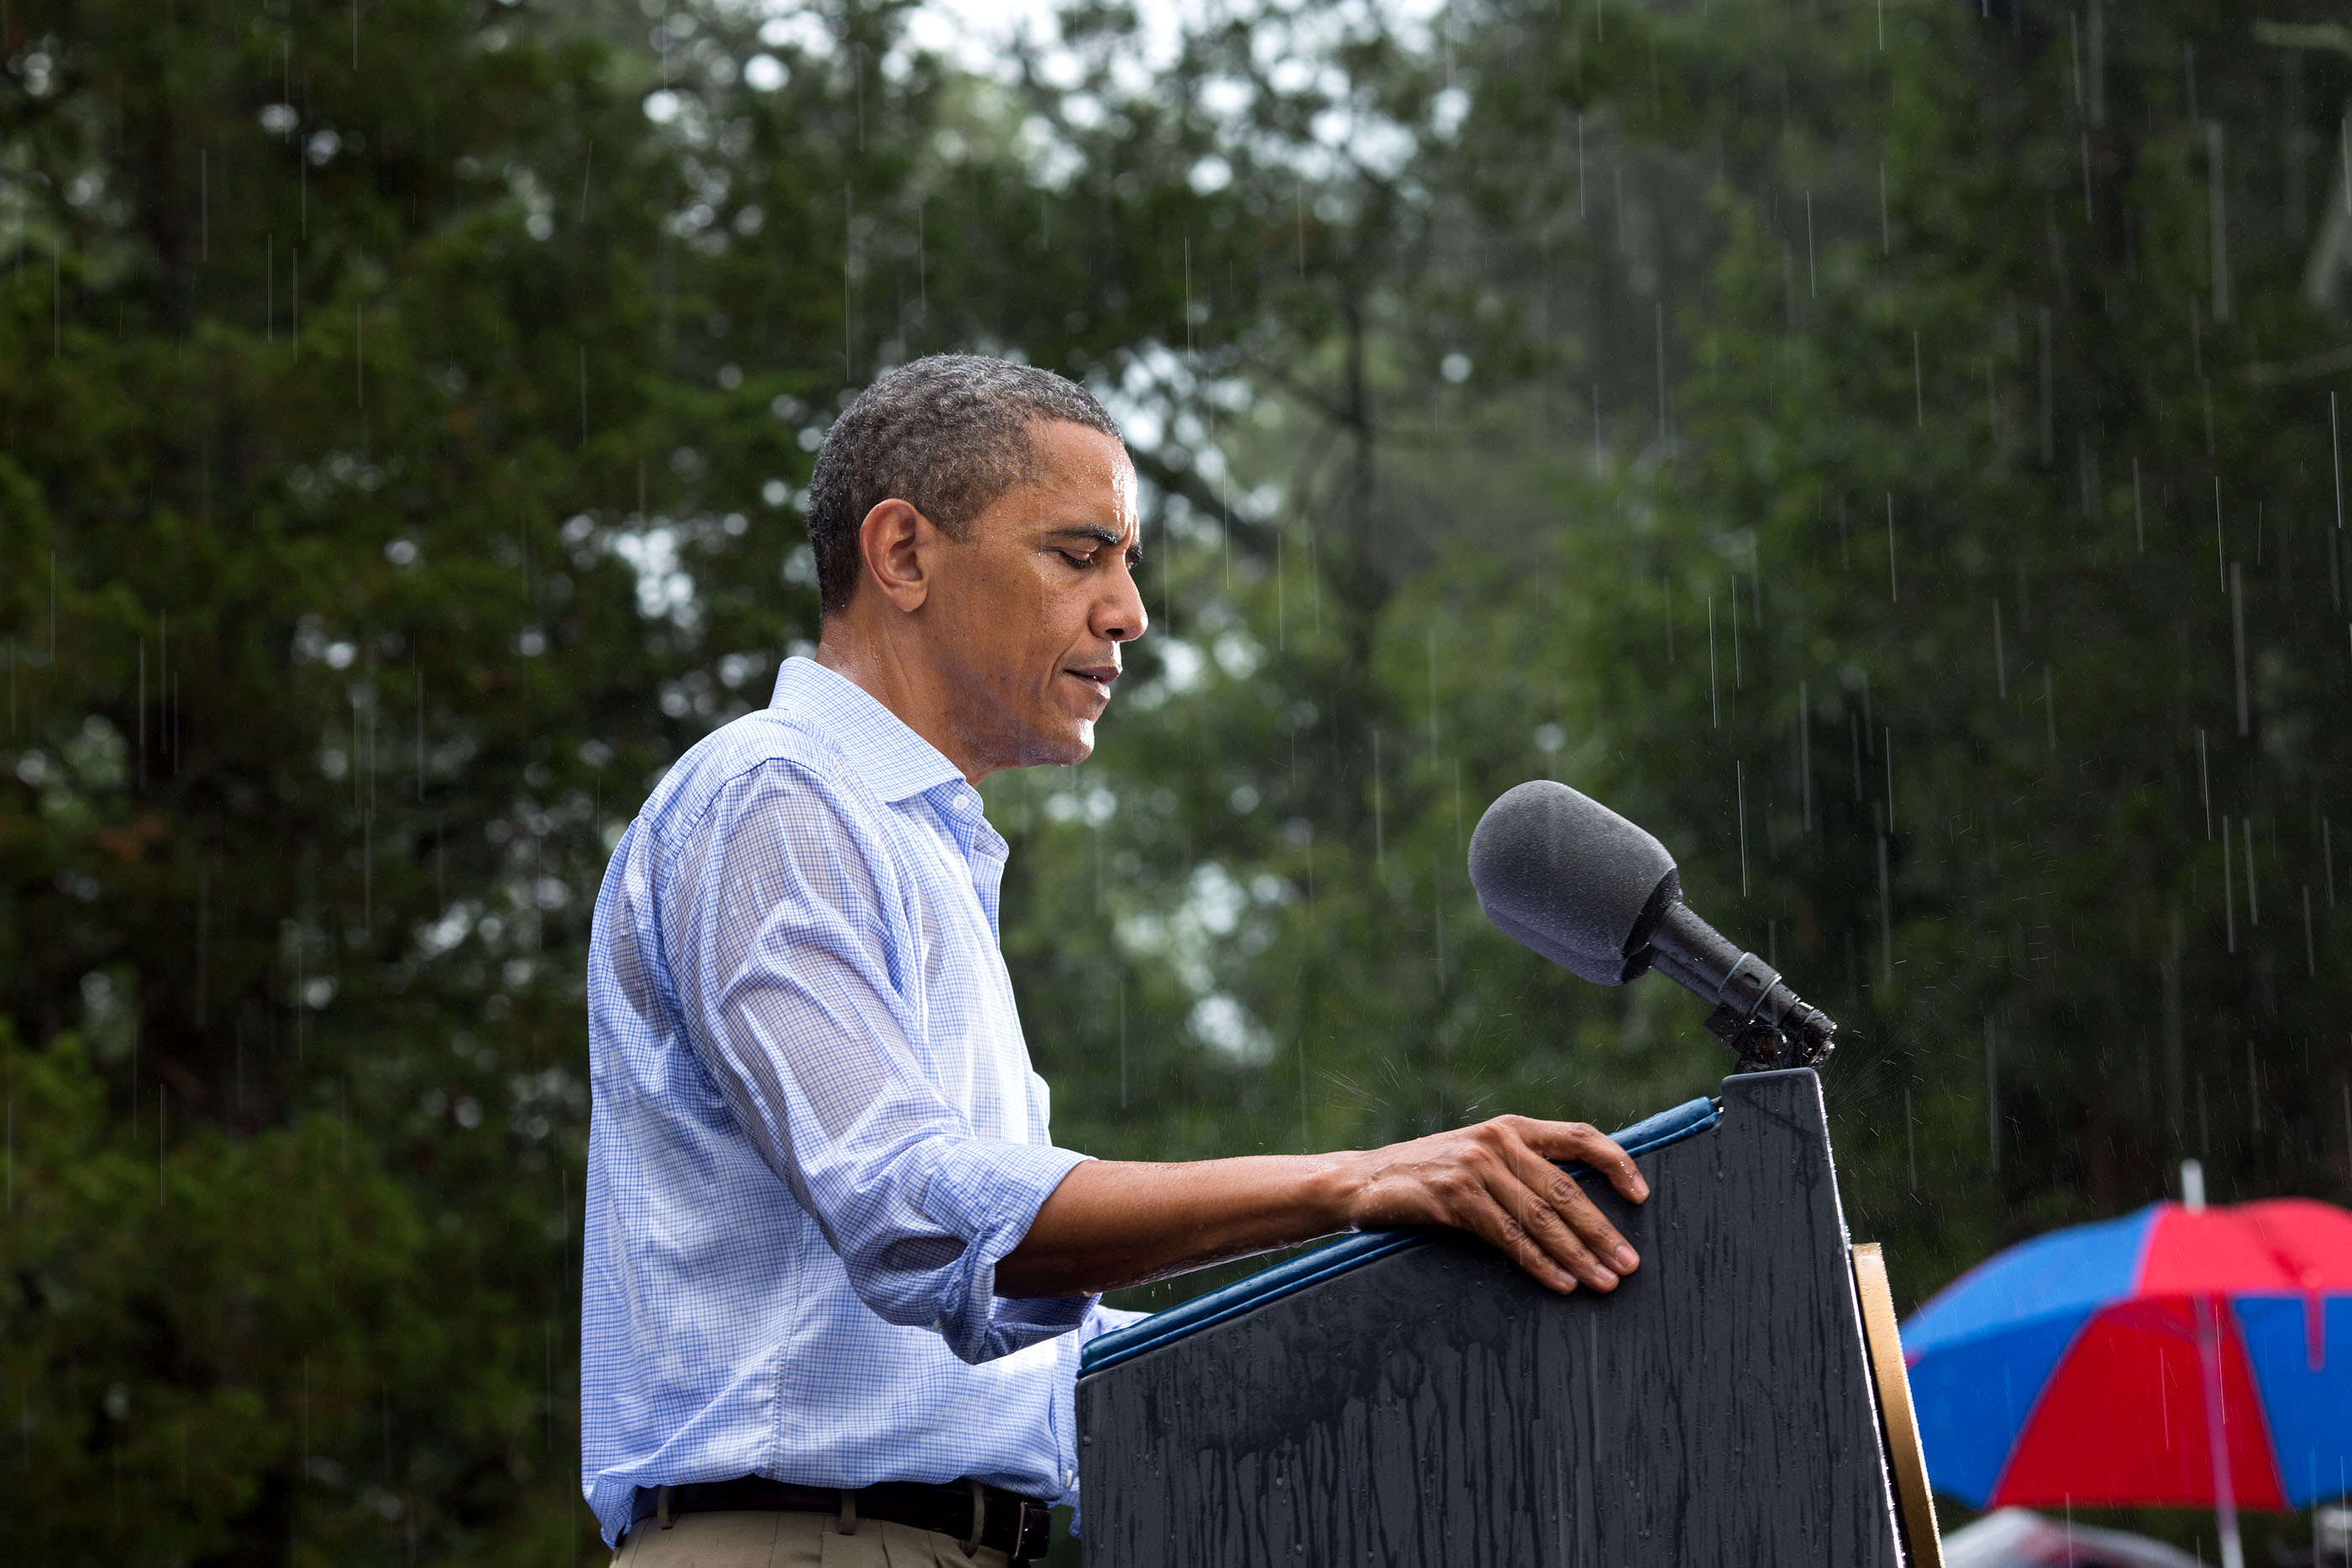 Virginia, July 14, 2012. Speaking during a rainstorm in Glen Allen. (Official White House Photo by Pete Souza)